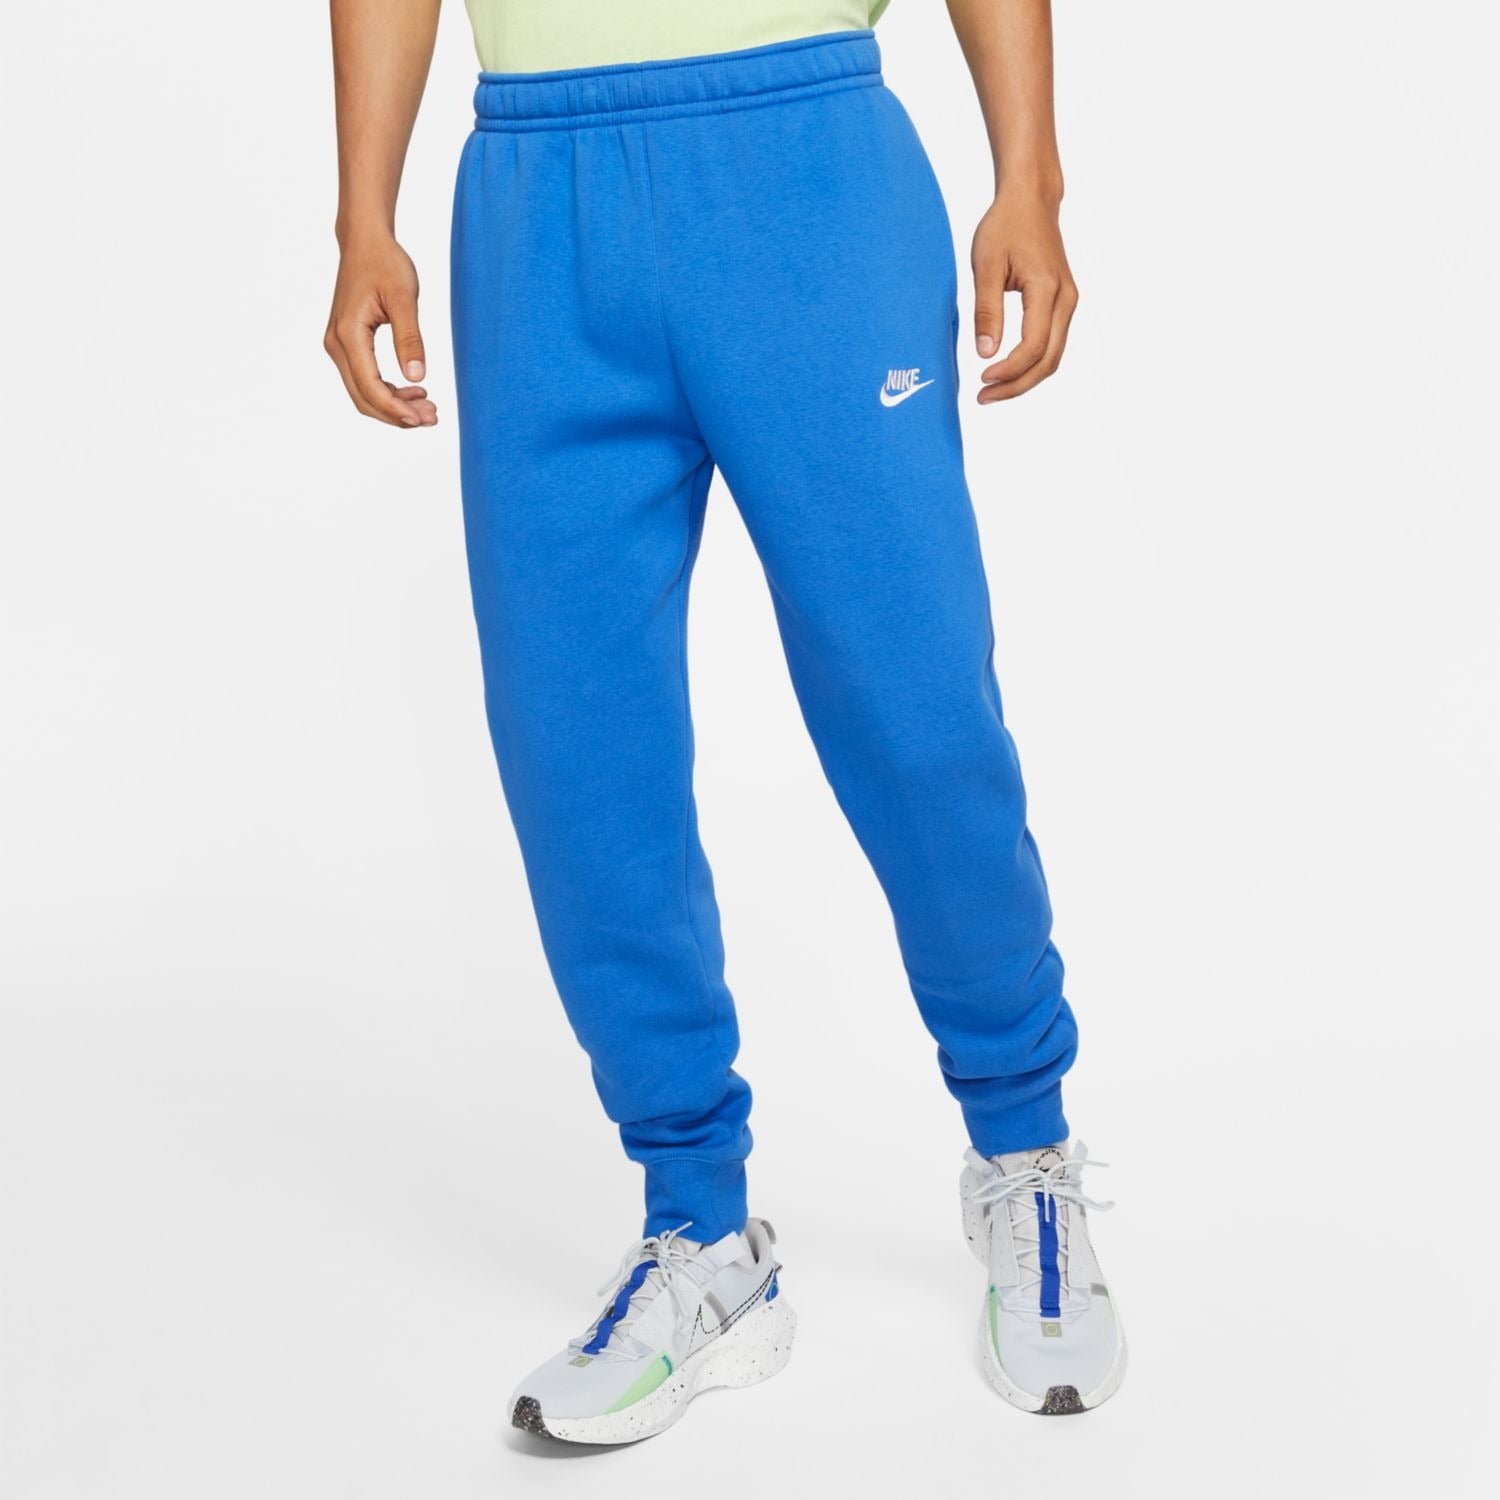 Nike Men's Sportswear Club Fleece Outfit - Color: Signal Blue White - Tops and Bottoms USA -